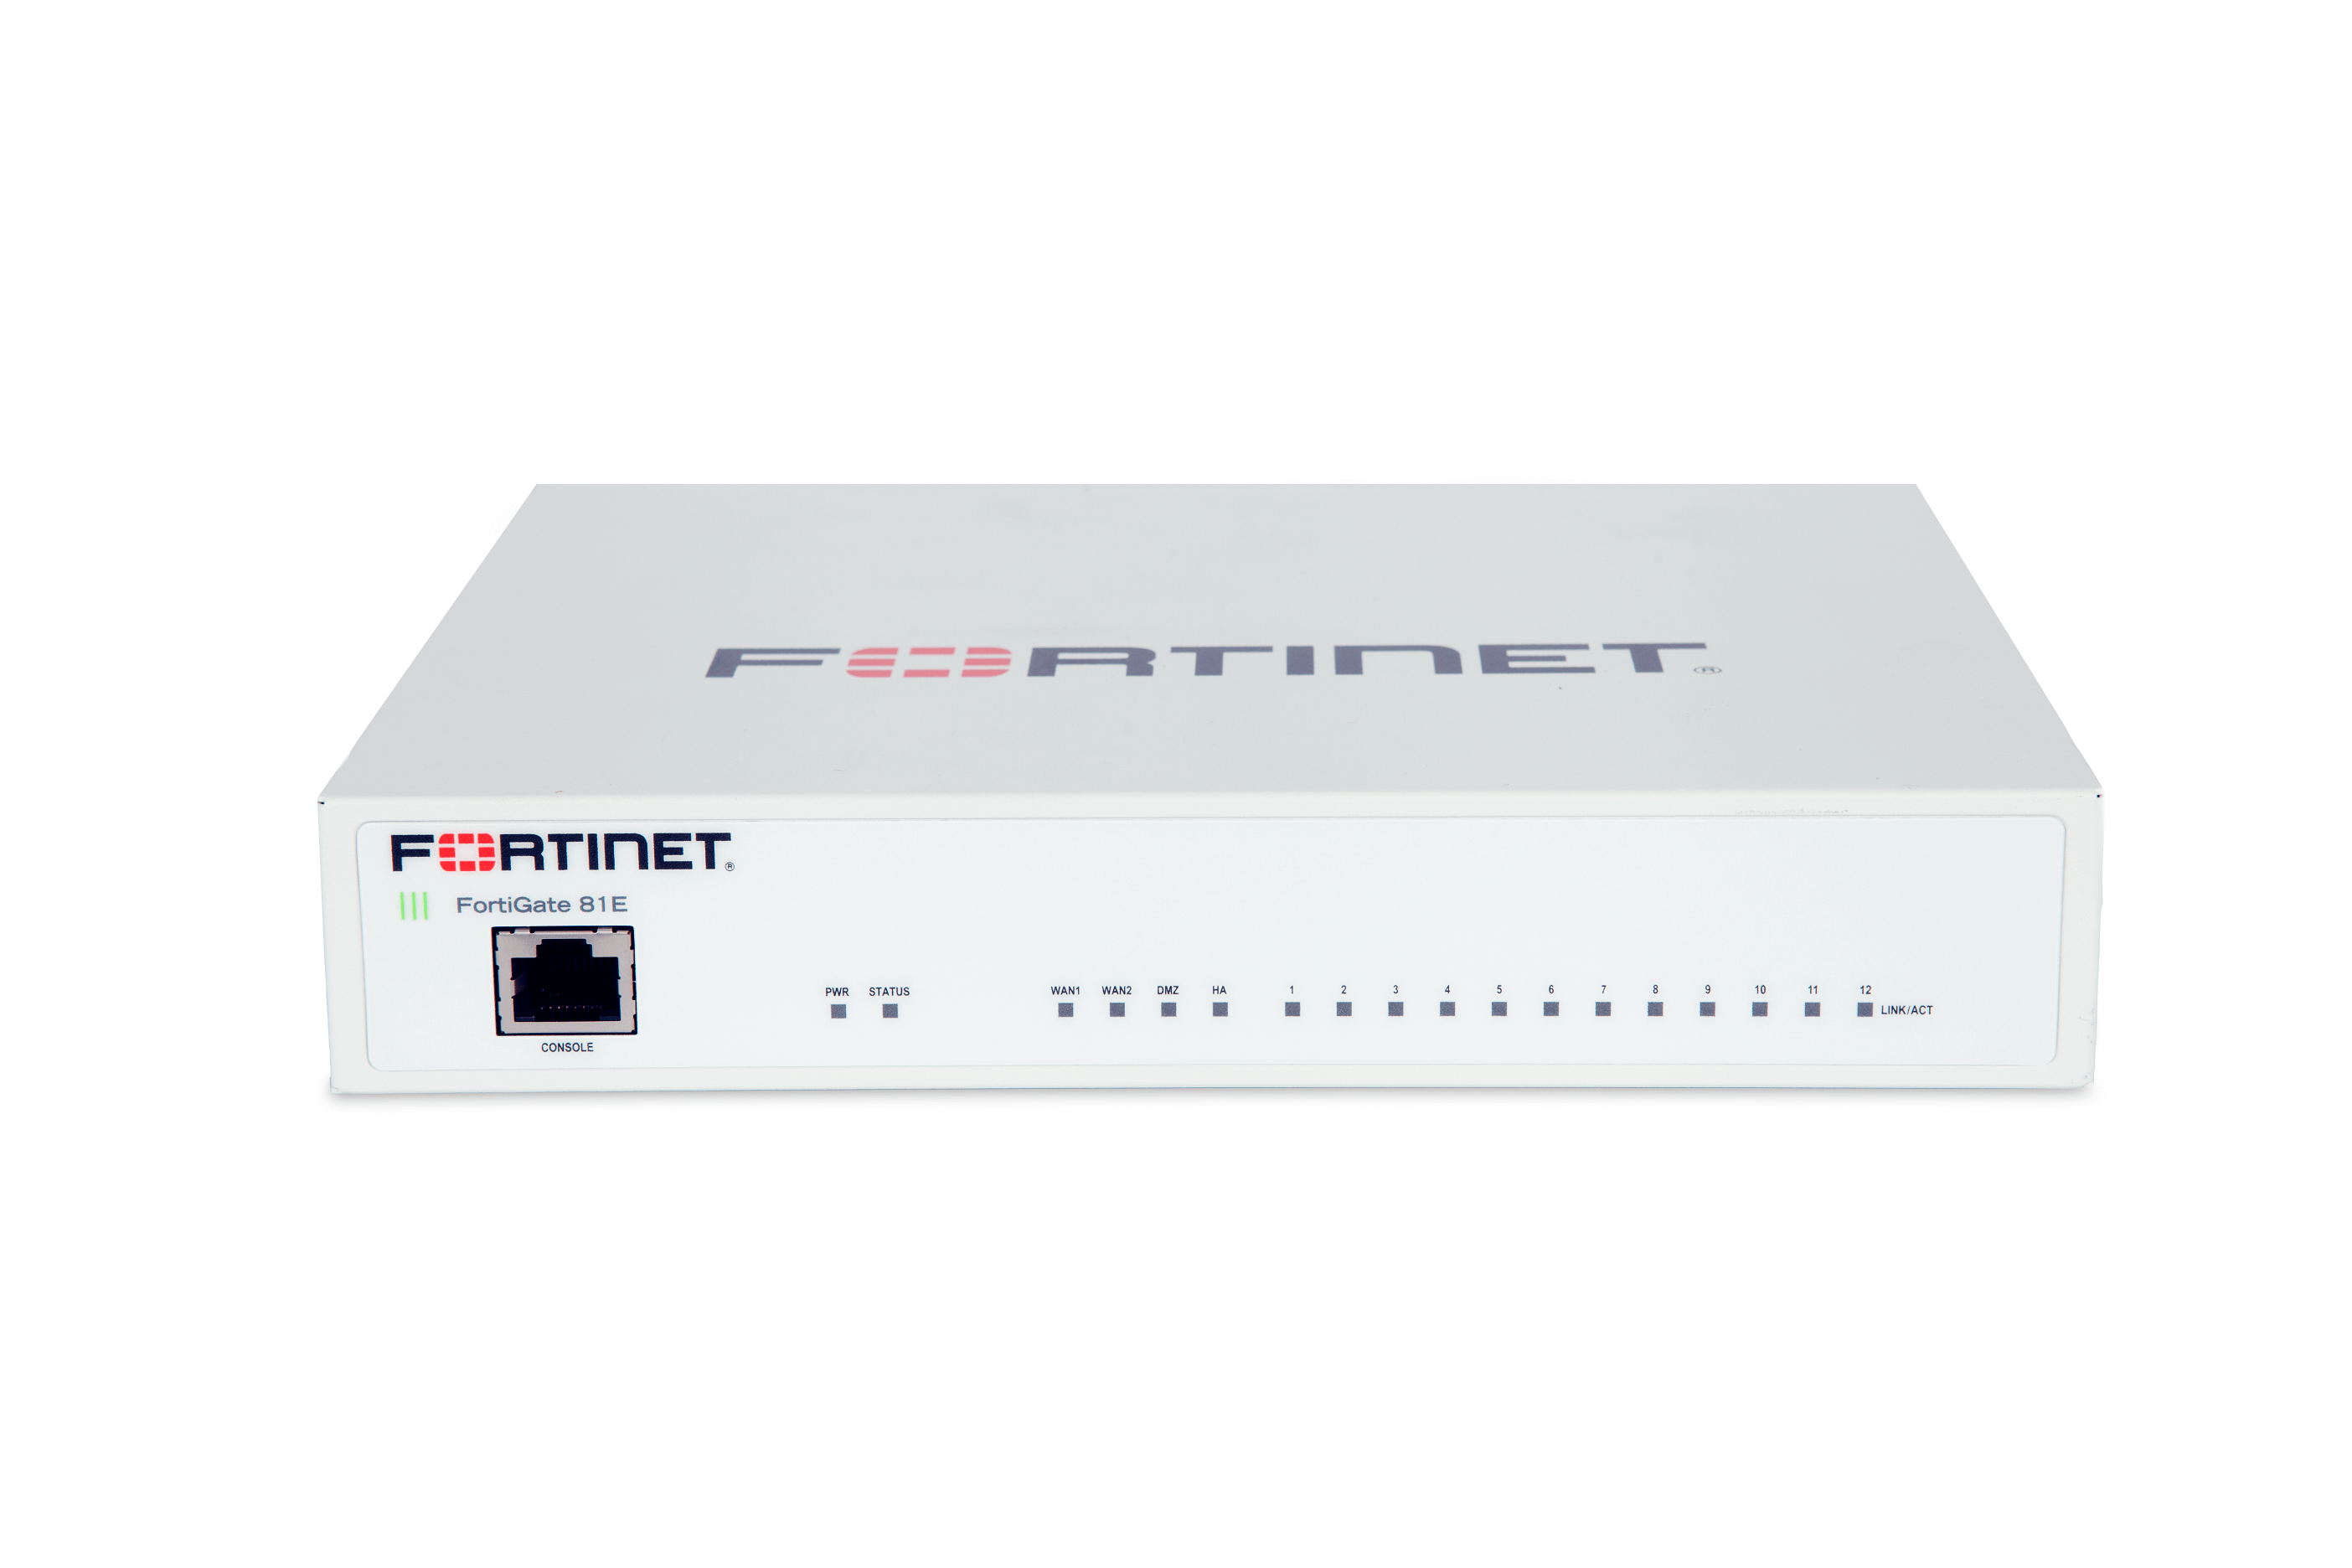 Fortinet FortiGate 81E Firewall (End of Sale/Life)